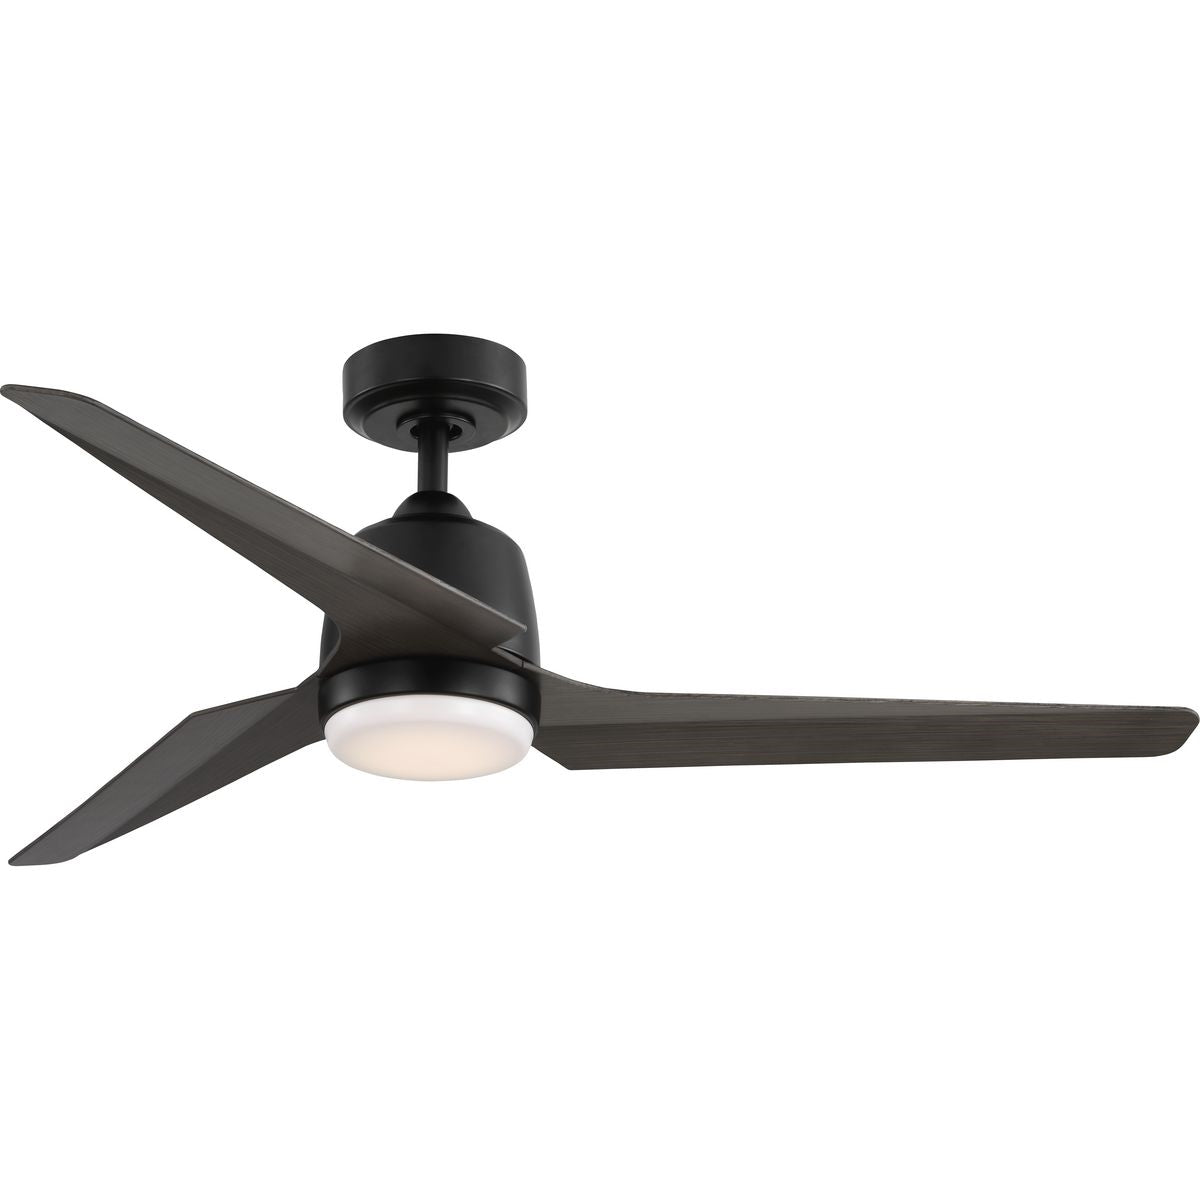 Upshur 52 Inch Modern Propeller Outdoor Ceiling Fan With Light And Remote